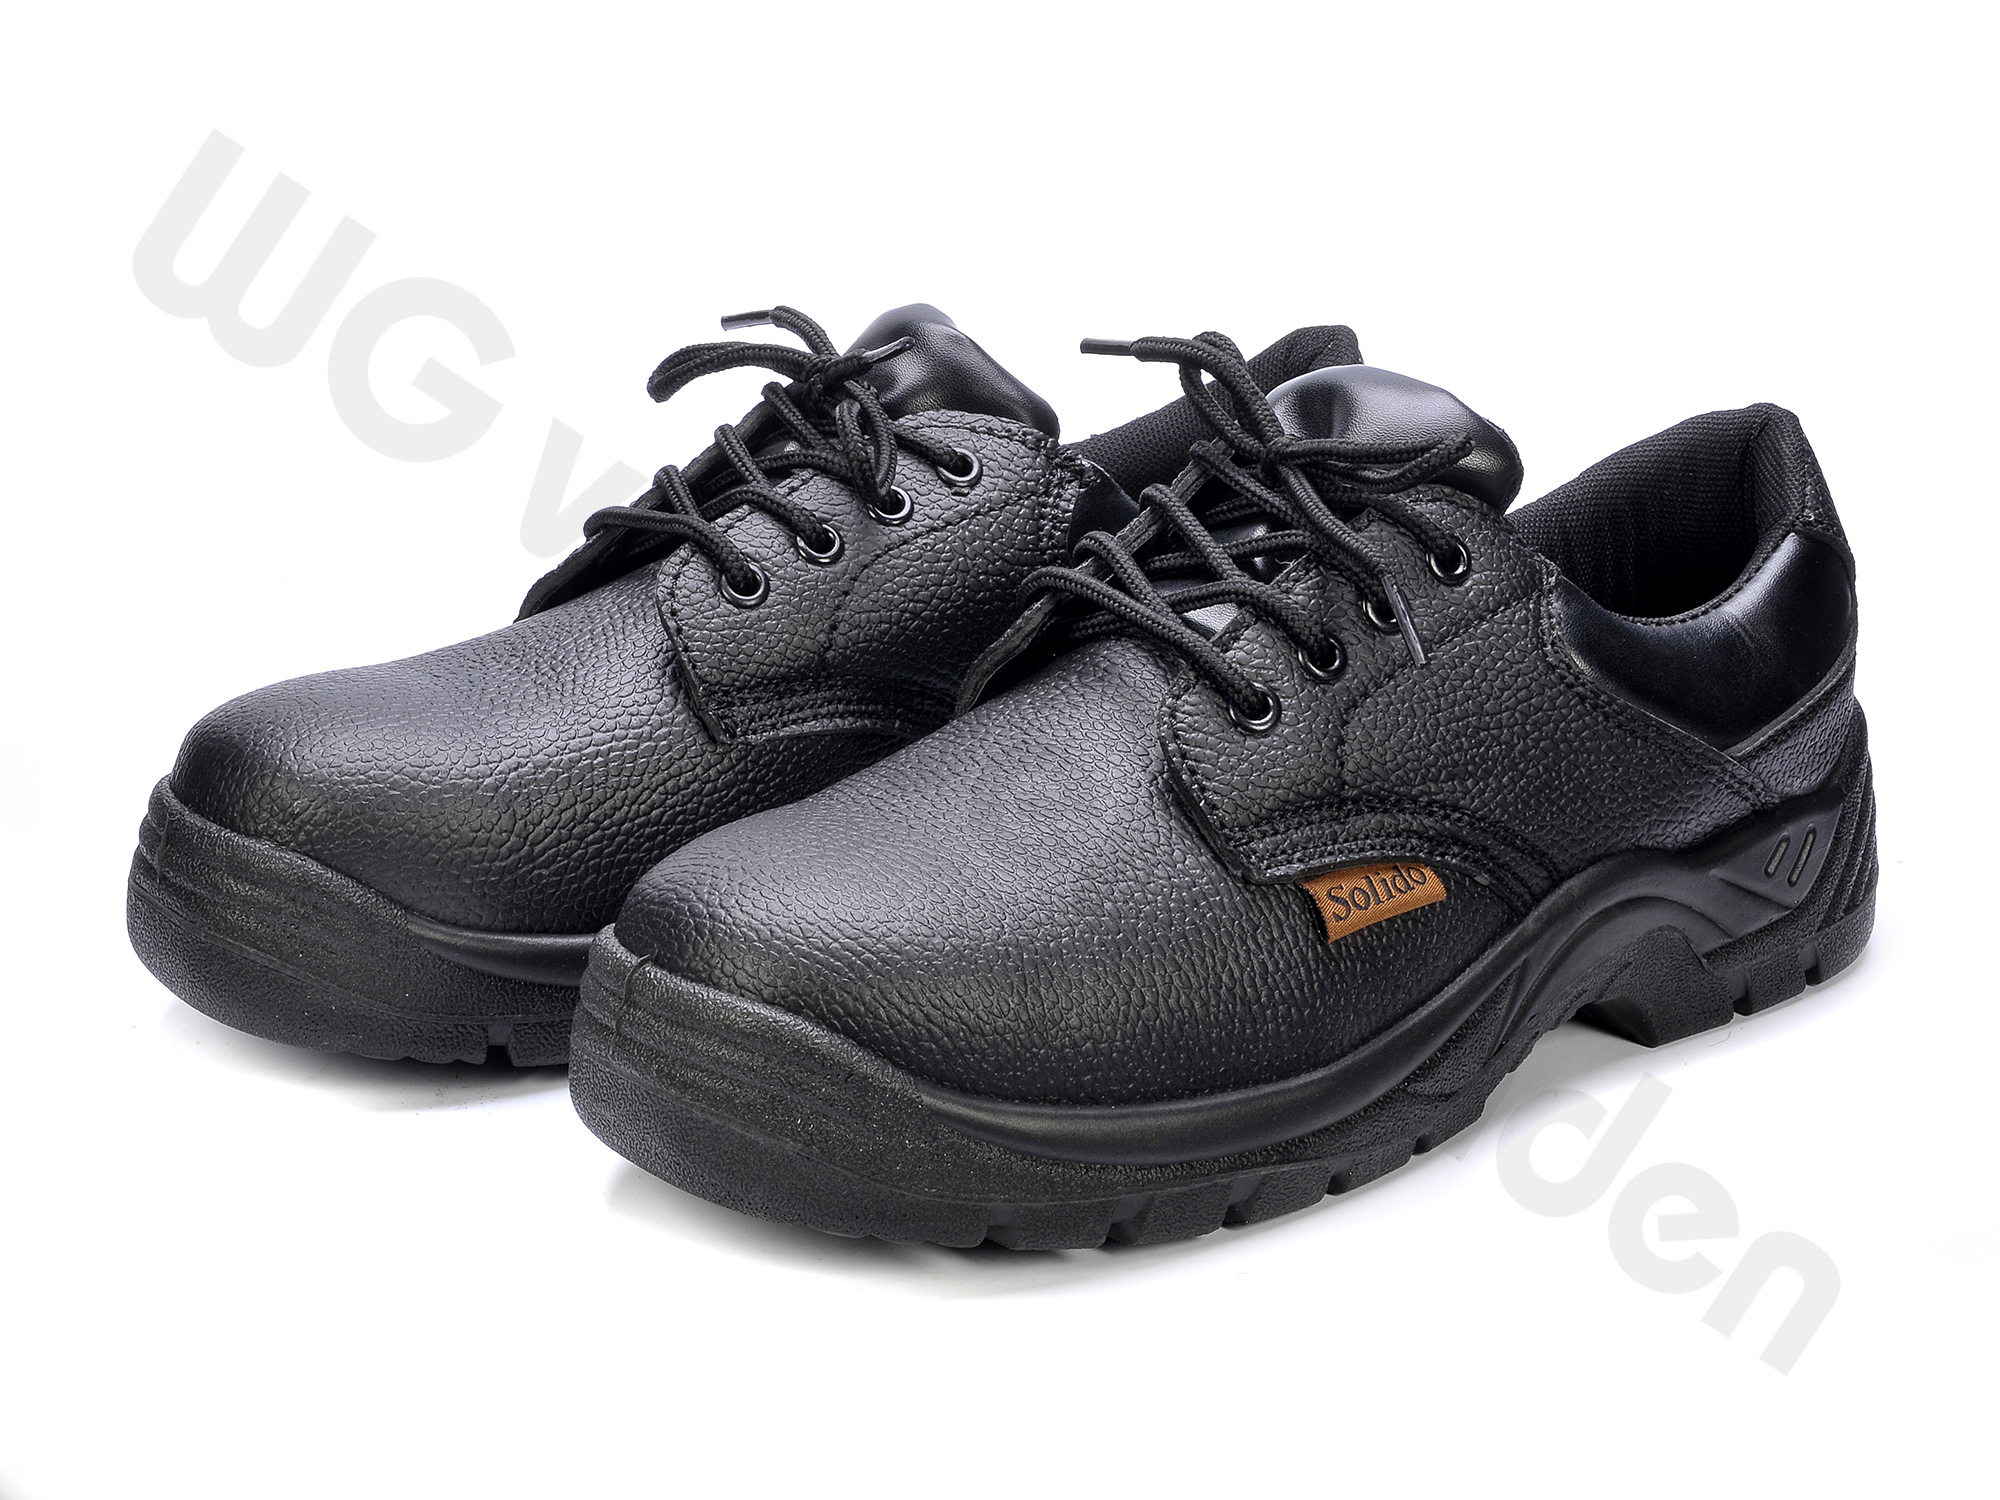 880610 SHOES SAFETY S1 WITH STEEL TOE SIZE 47 / 29.5CM CE